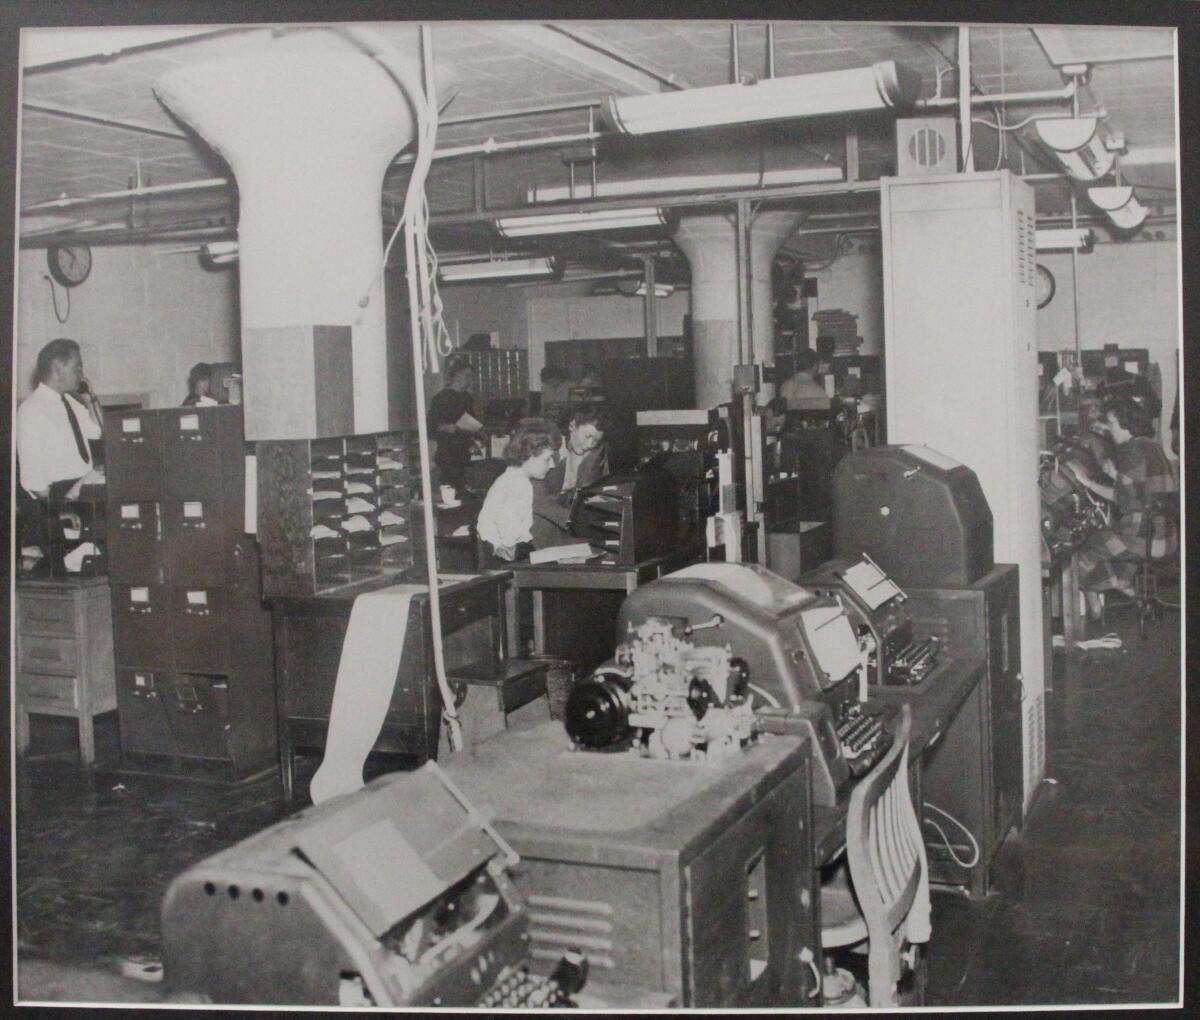 Teletypes dominated communications at NPL in the mid-1940s.